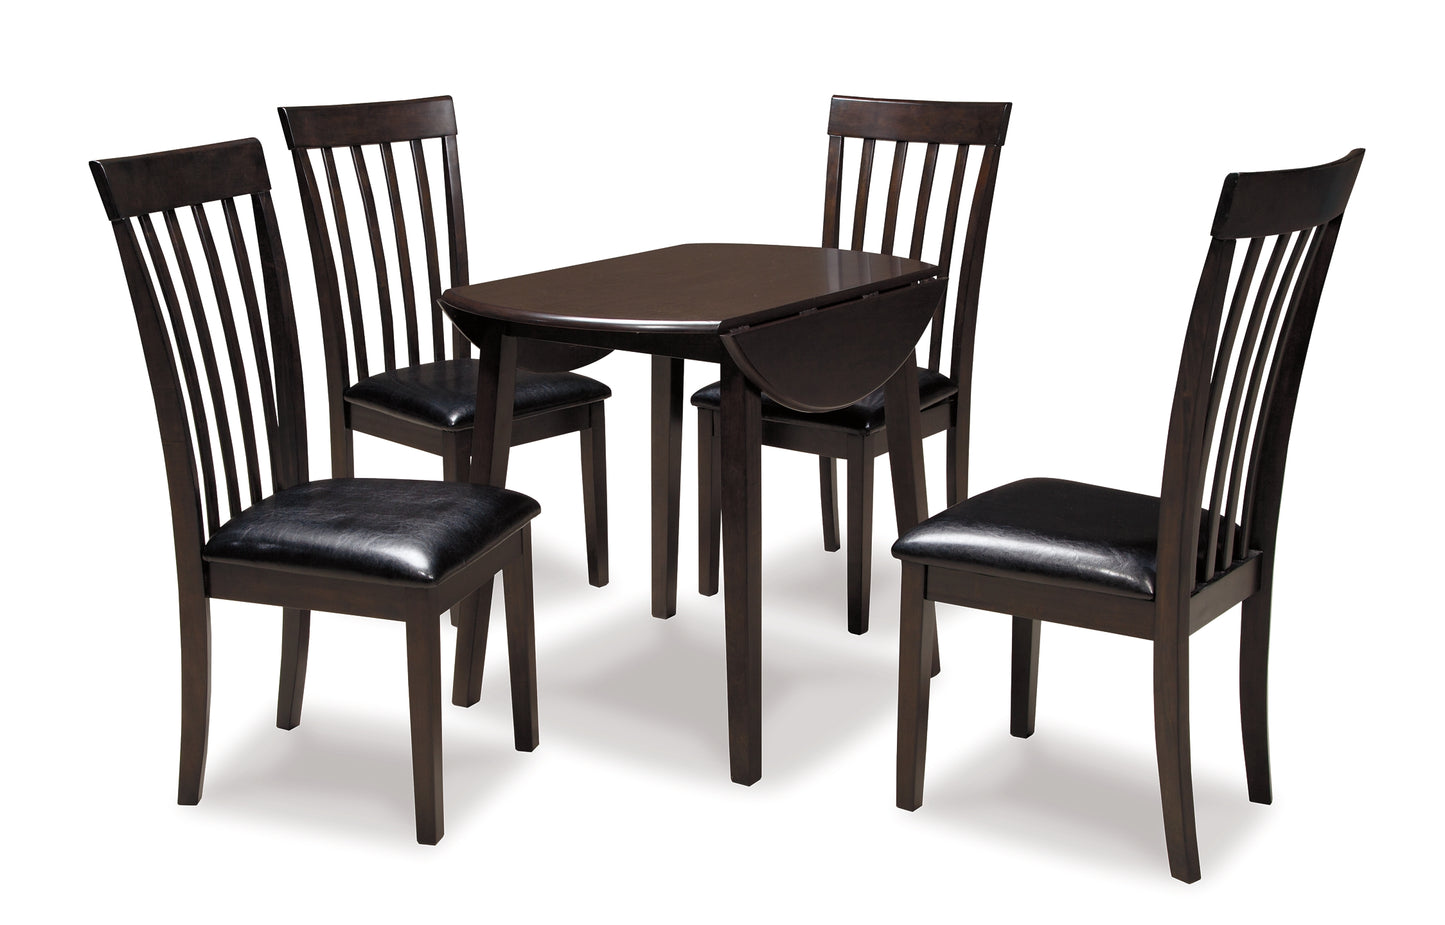 Hammis Dining Table and 4 Chairs